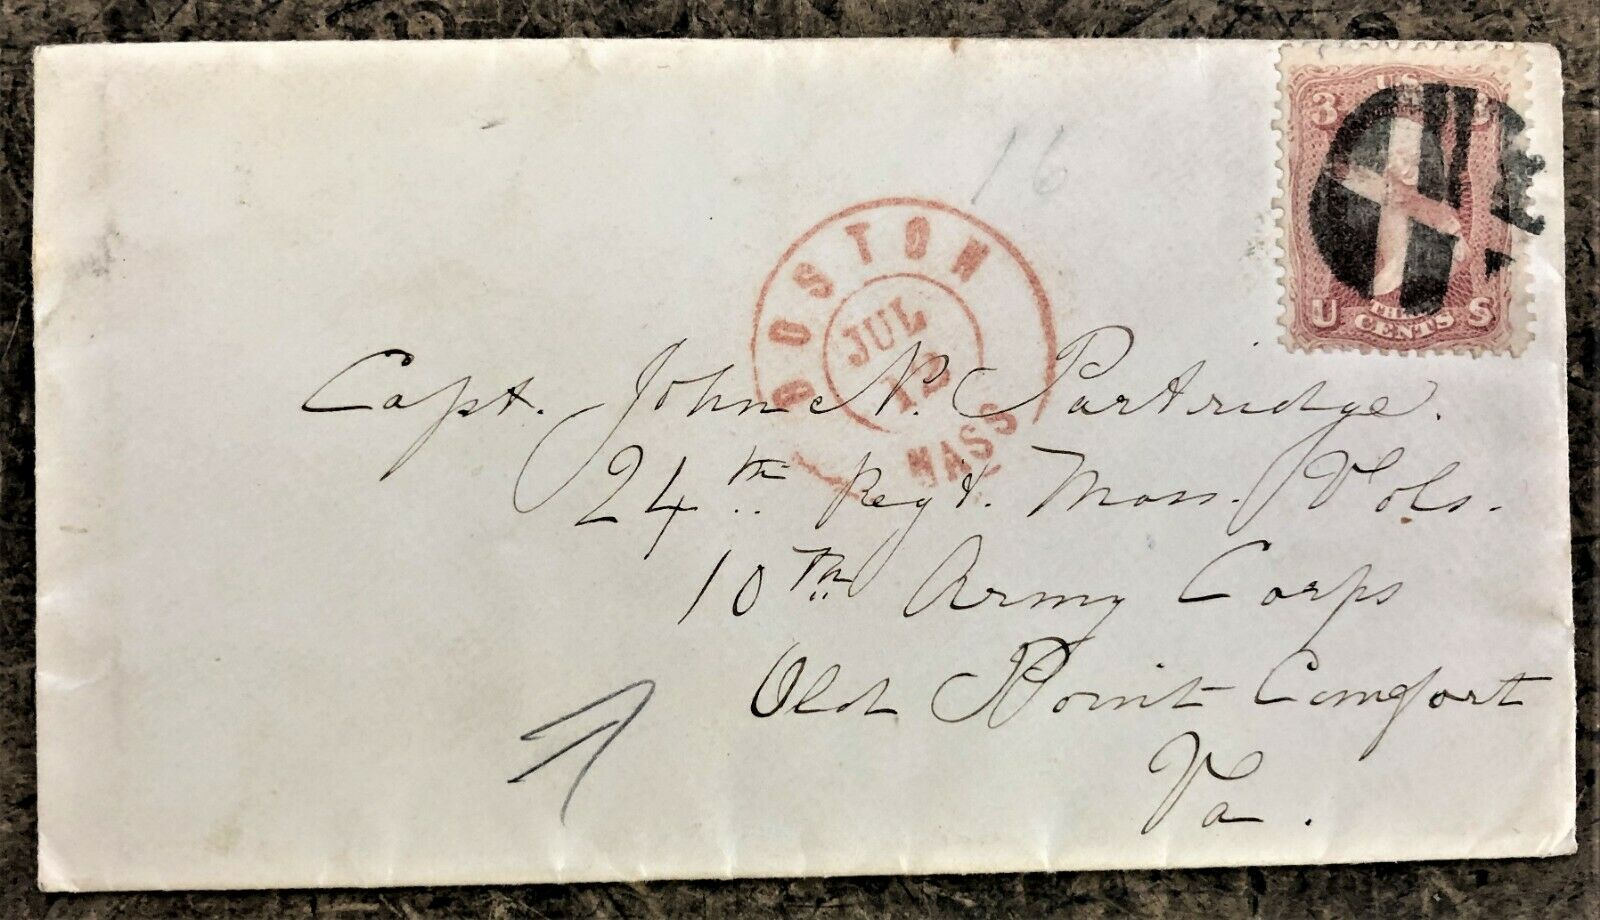 CIVIL WAR COVER from BOSTON to J. PARTRIDGE 24th REG. MASS VOLUNTEERS 10th ARMY